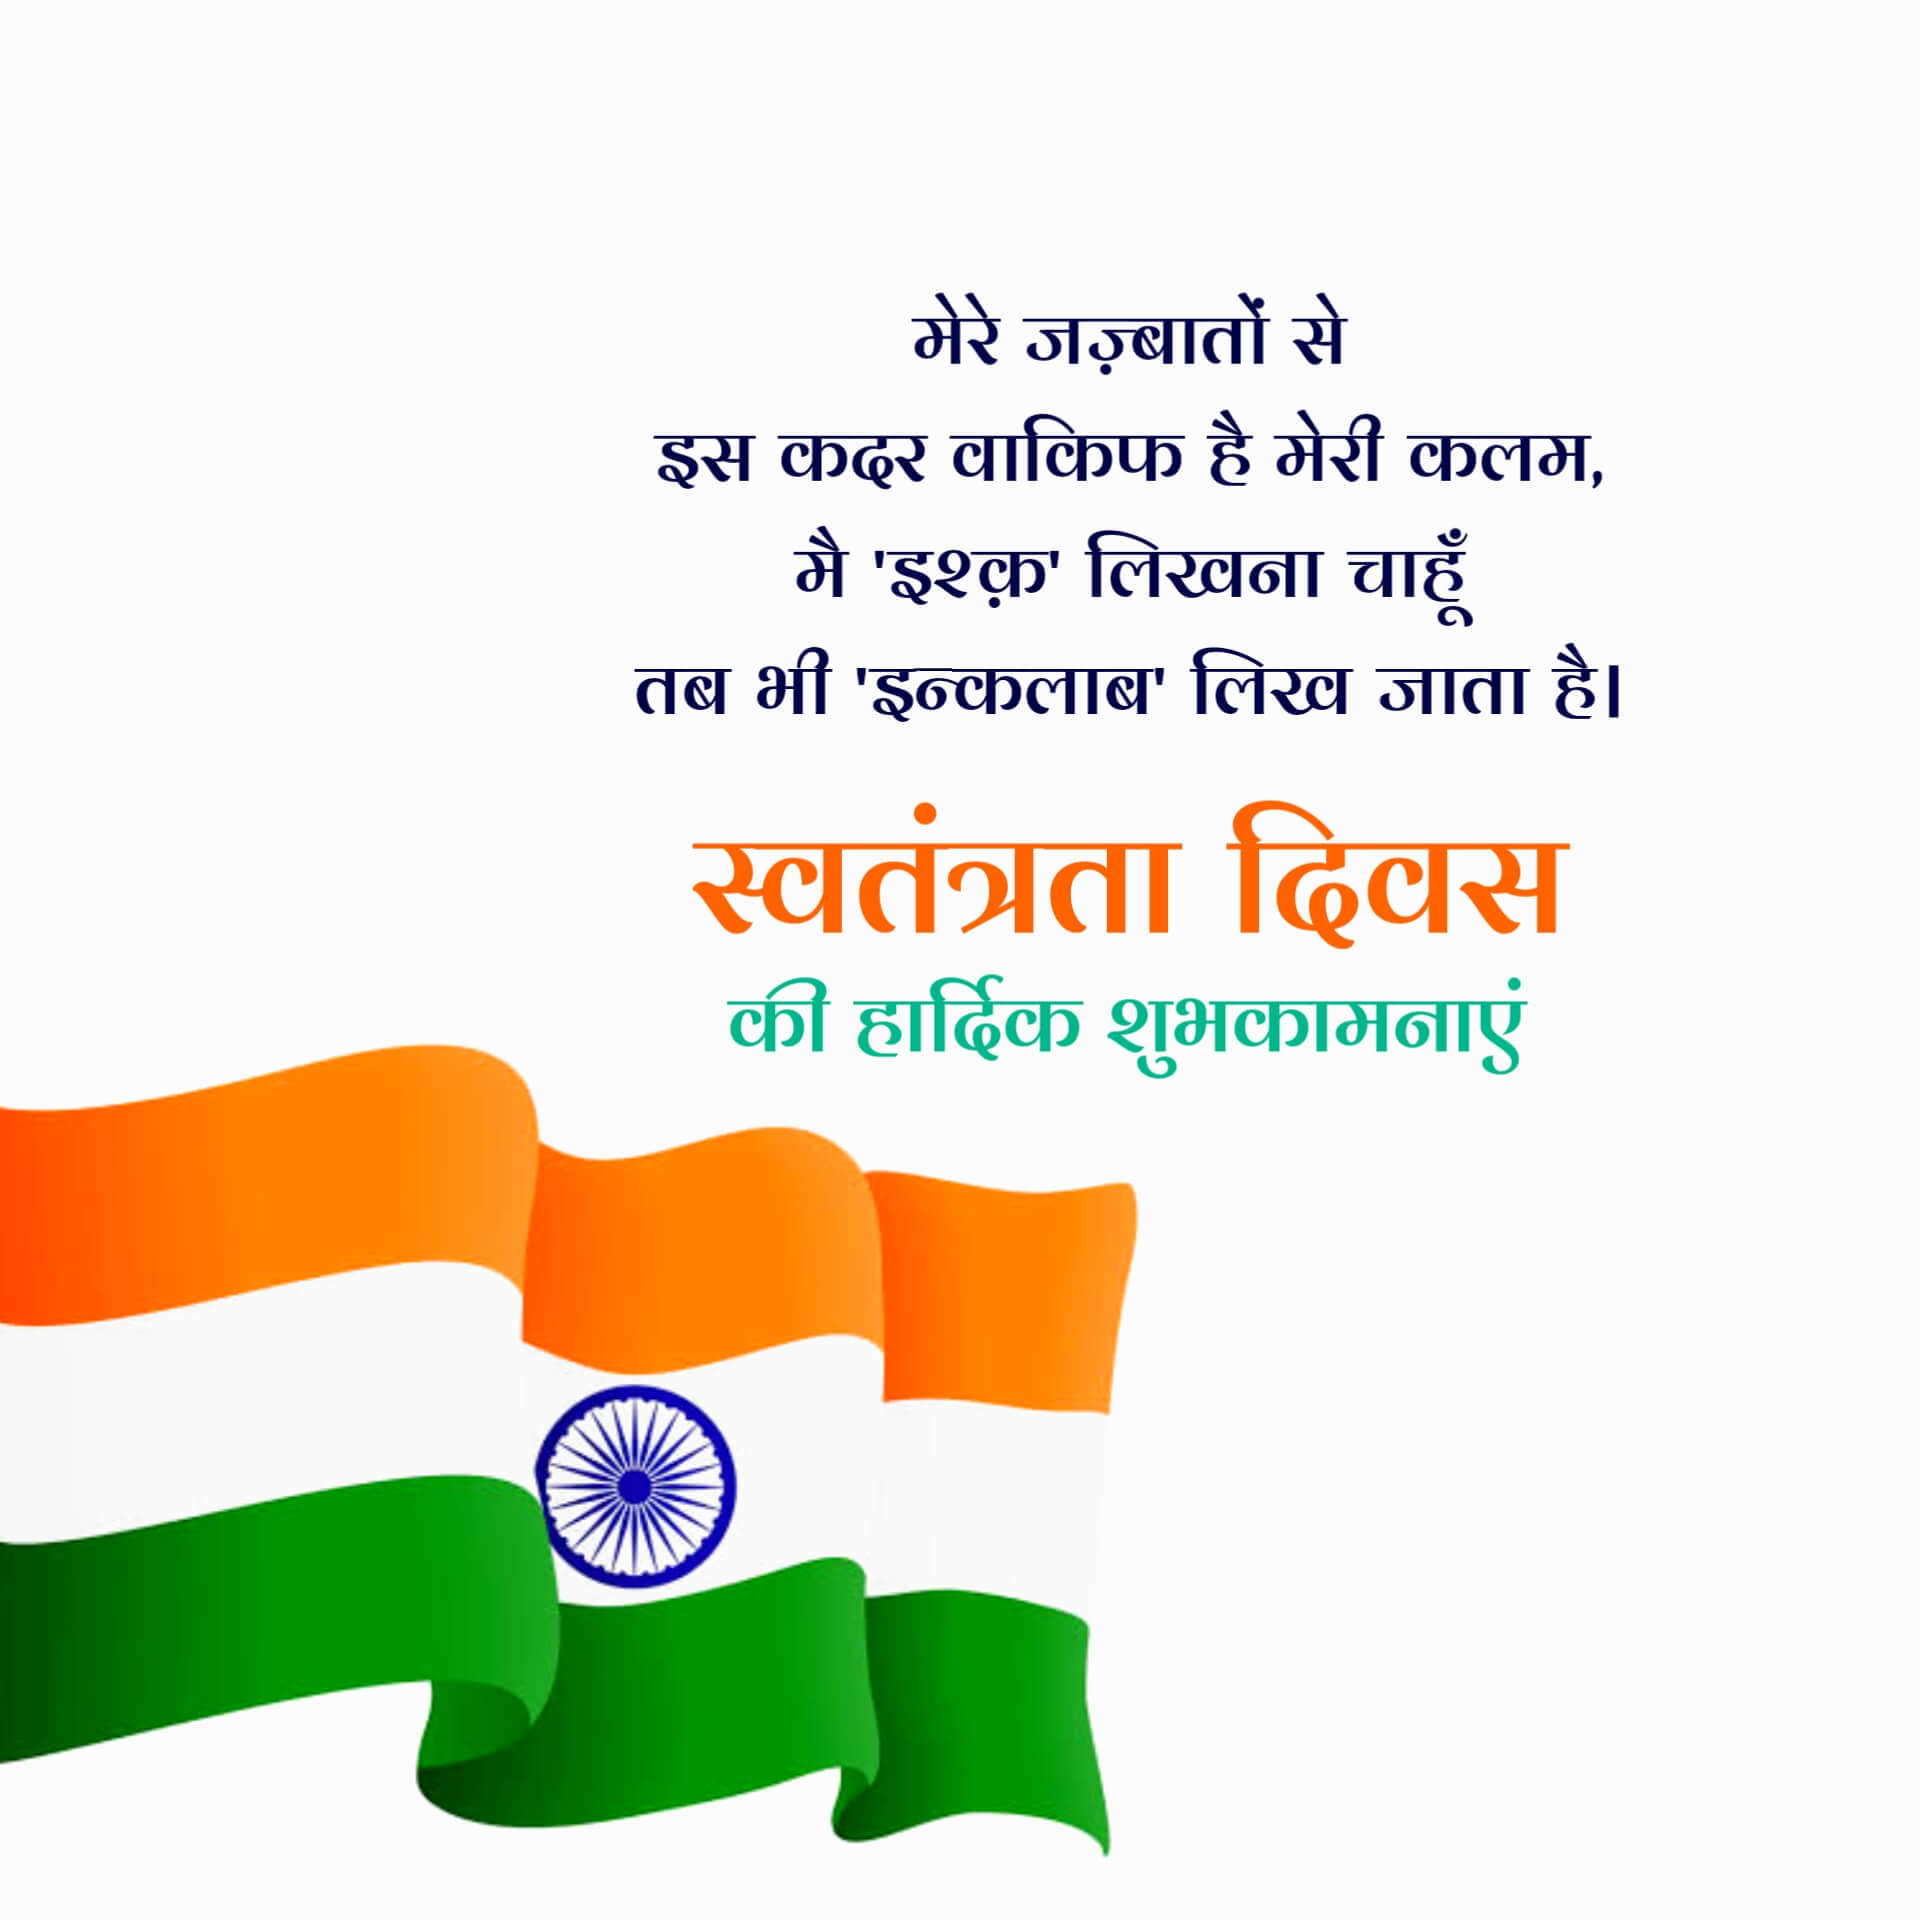 Hindi Independence Day Image with Quotes